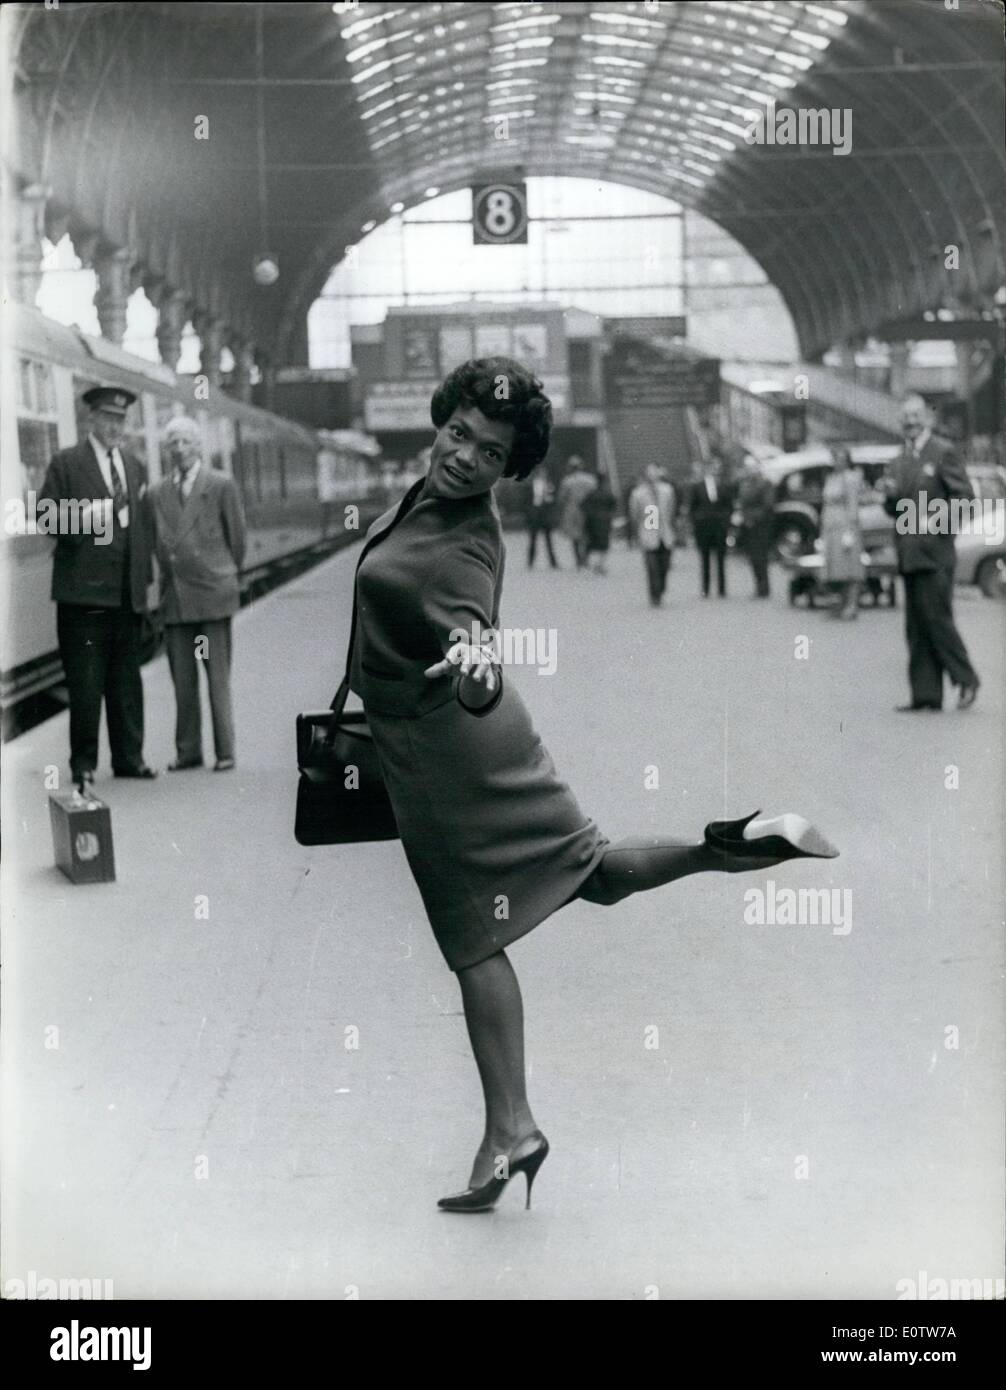 Aug. 08, 1960 - Eartha Kitt Arrives In London With Her Husband Of Three Months: Eartha Kitt, the singer whose purring notes bring out the ay dog in most men, arrived in London yesterday accompanied by her husband of three months, Hollywood real-estate man Bill McDonald. Eartha who is here for a two-month cabaret season, says she hope to become an expectant mother while in London. Photo shows Eartha Kitt is in high spirits when she arrived at Paddington Station yesterday. Stock Photo